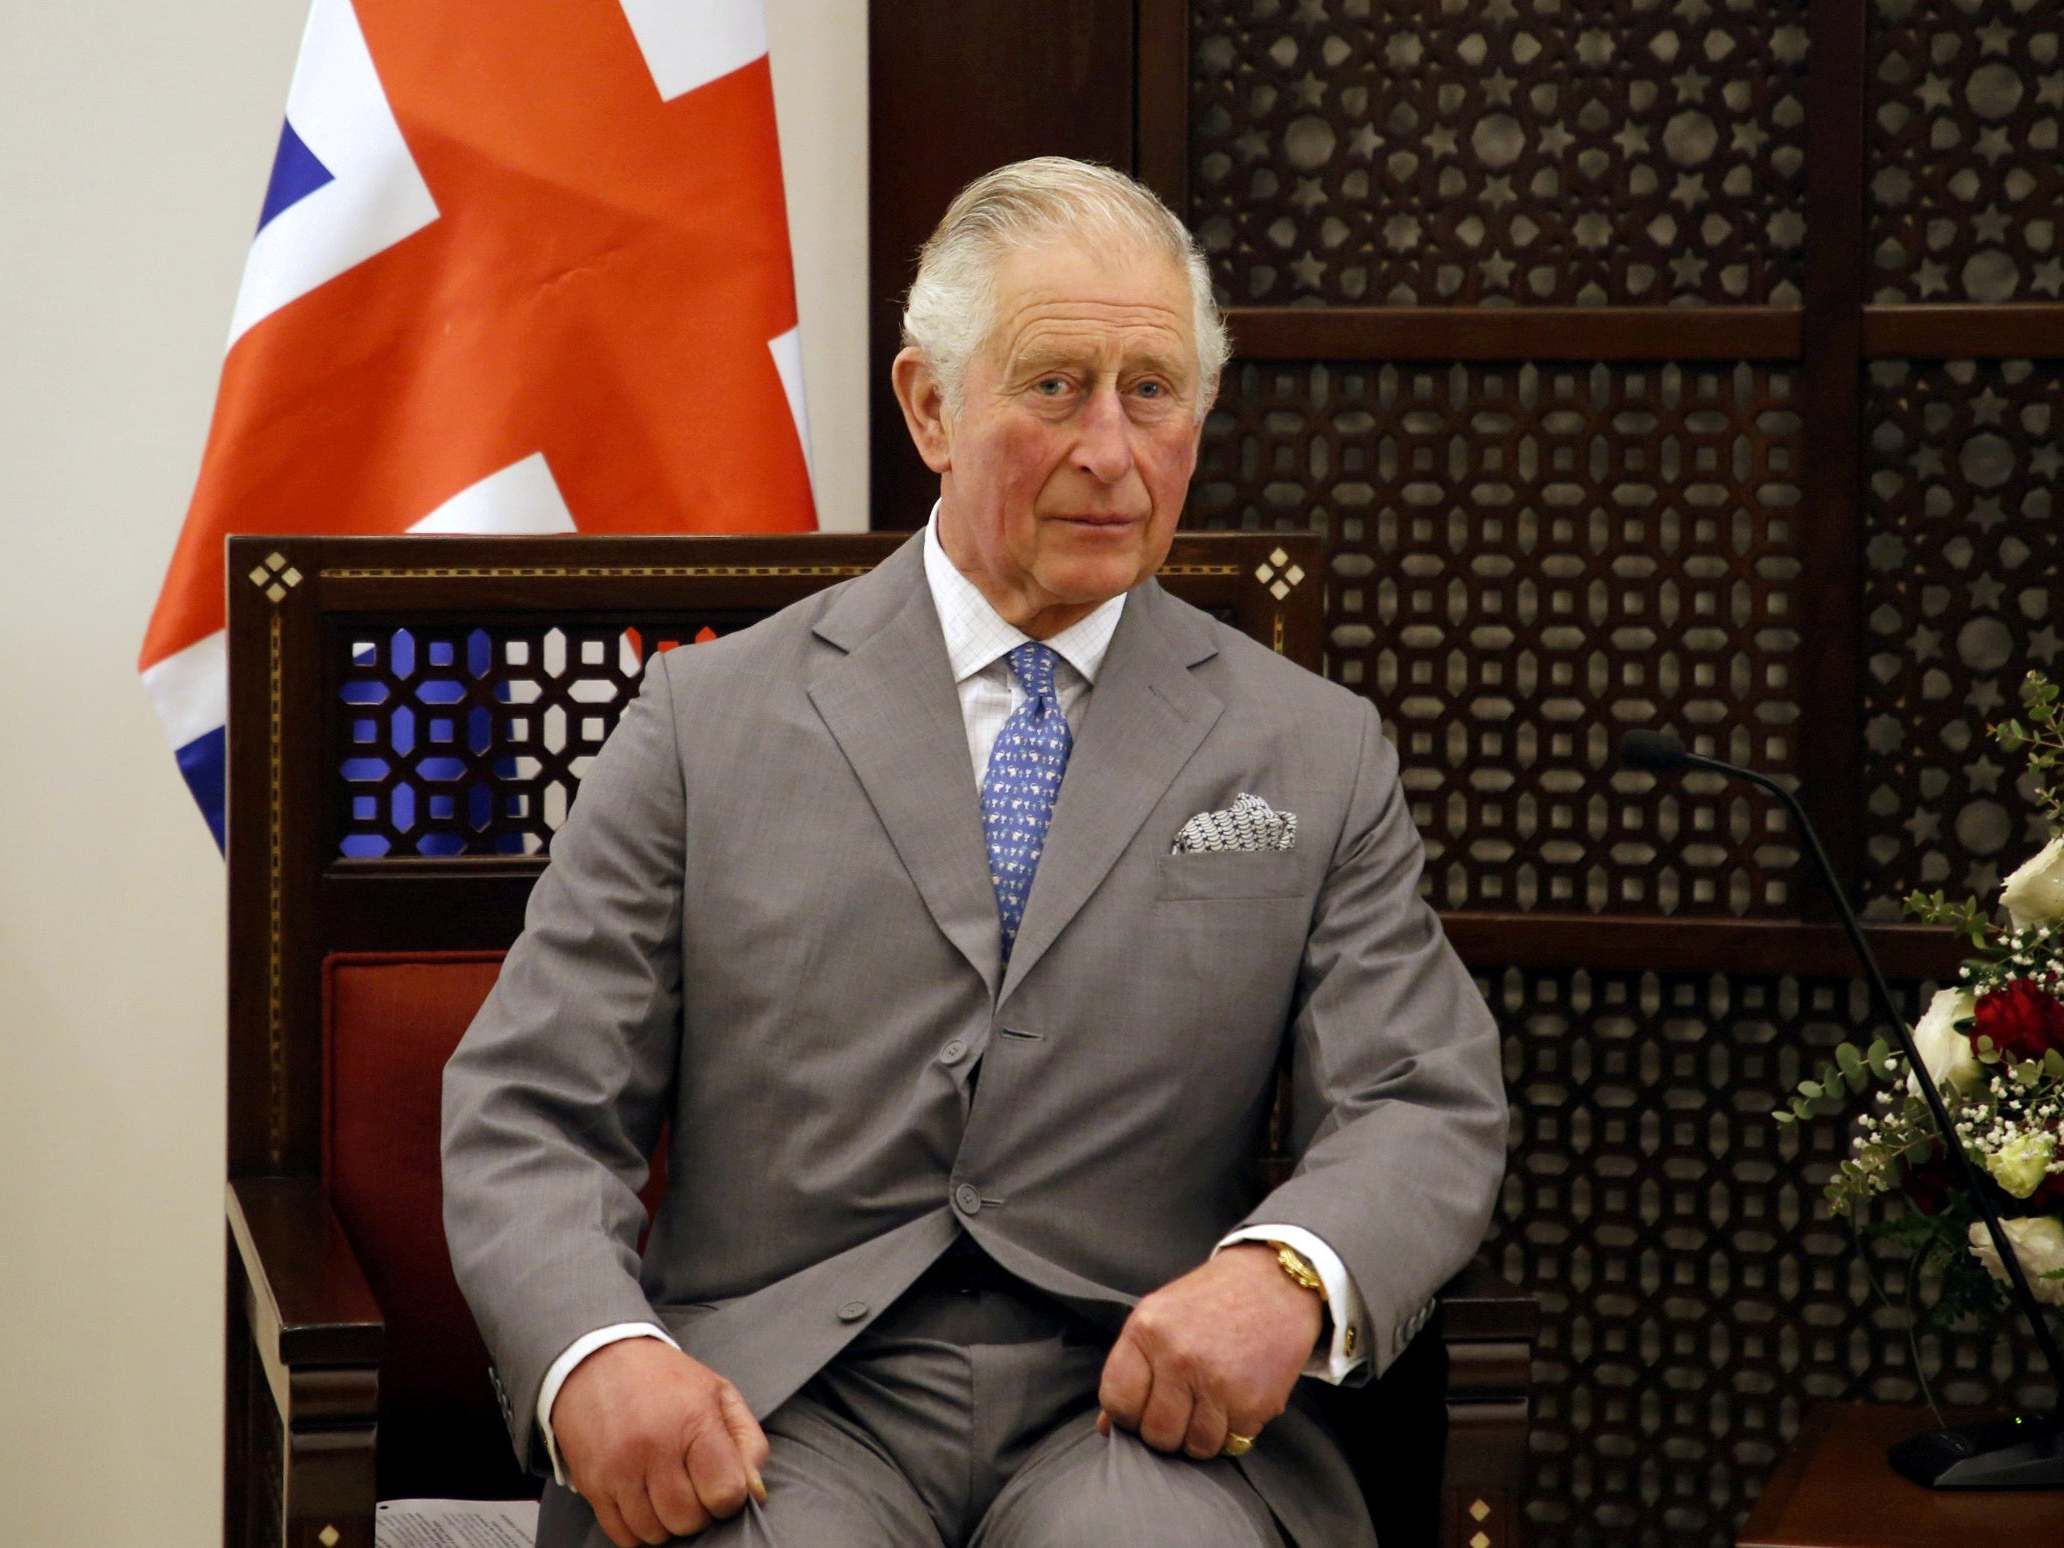 Britain's Prince Charles during a visit in Bethlehem in the Israeli-occupied West Bank